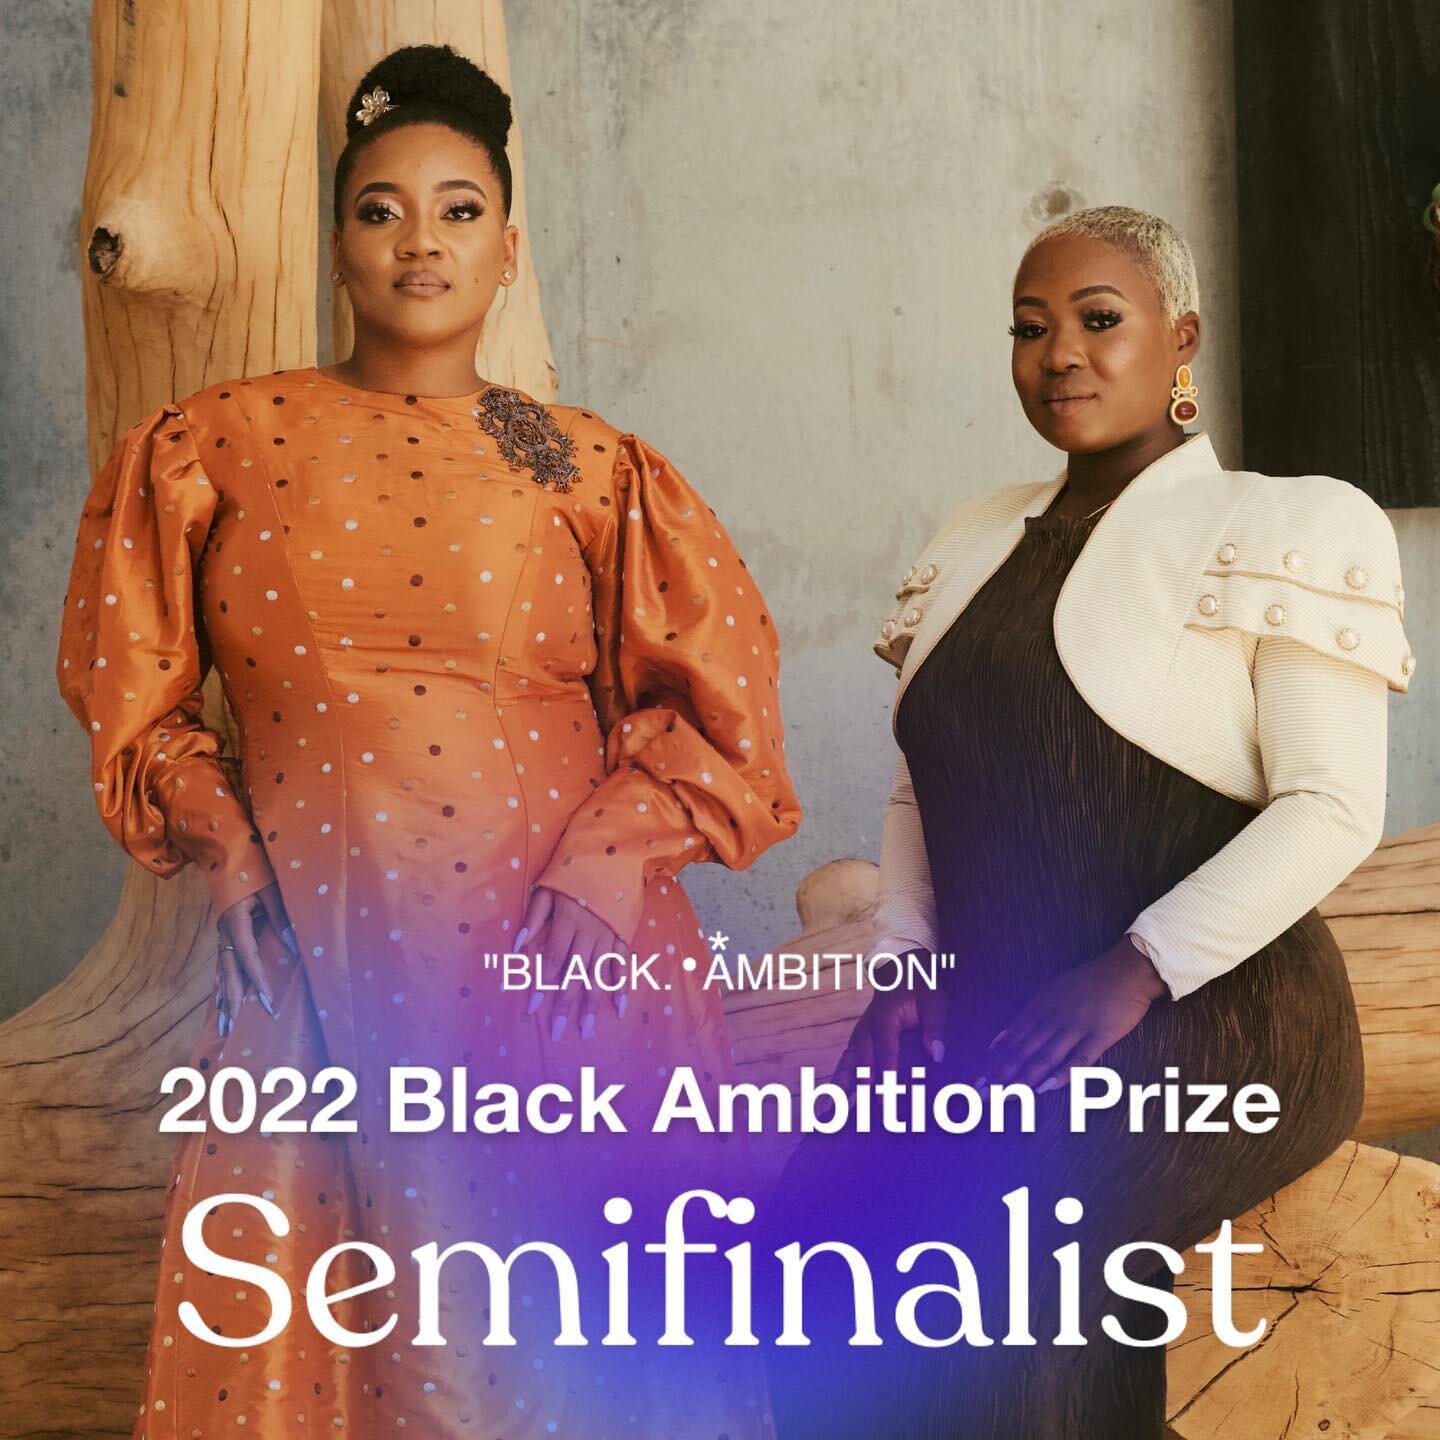 Yesterday we learned that @blaytorbox has advanced as a semi-finalist for the @blackambitionprize!!!! 

Founded by @pharrell, creatively designed by @virgilabloh, and led by @feleciahatcher, Black Ambition was created to find and fund Black and Latin